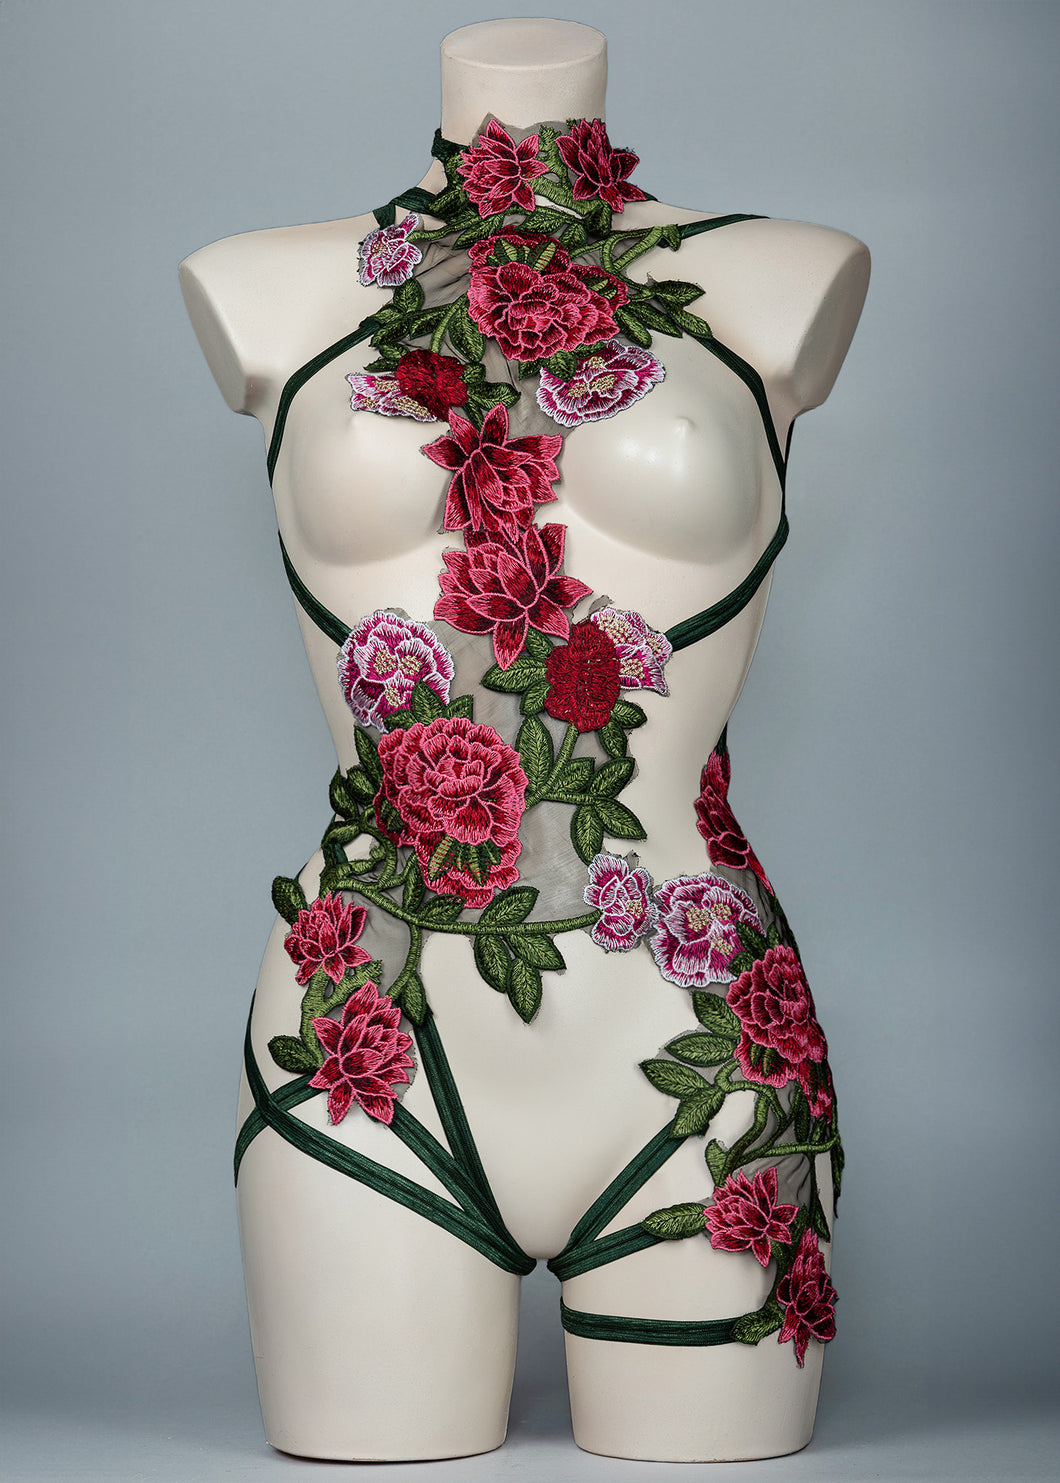 DIONYSIA - Embroidered Flower Bodycage